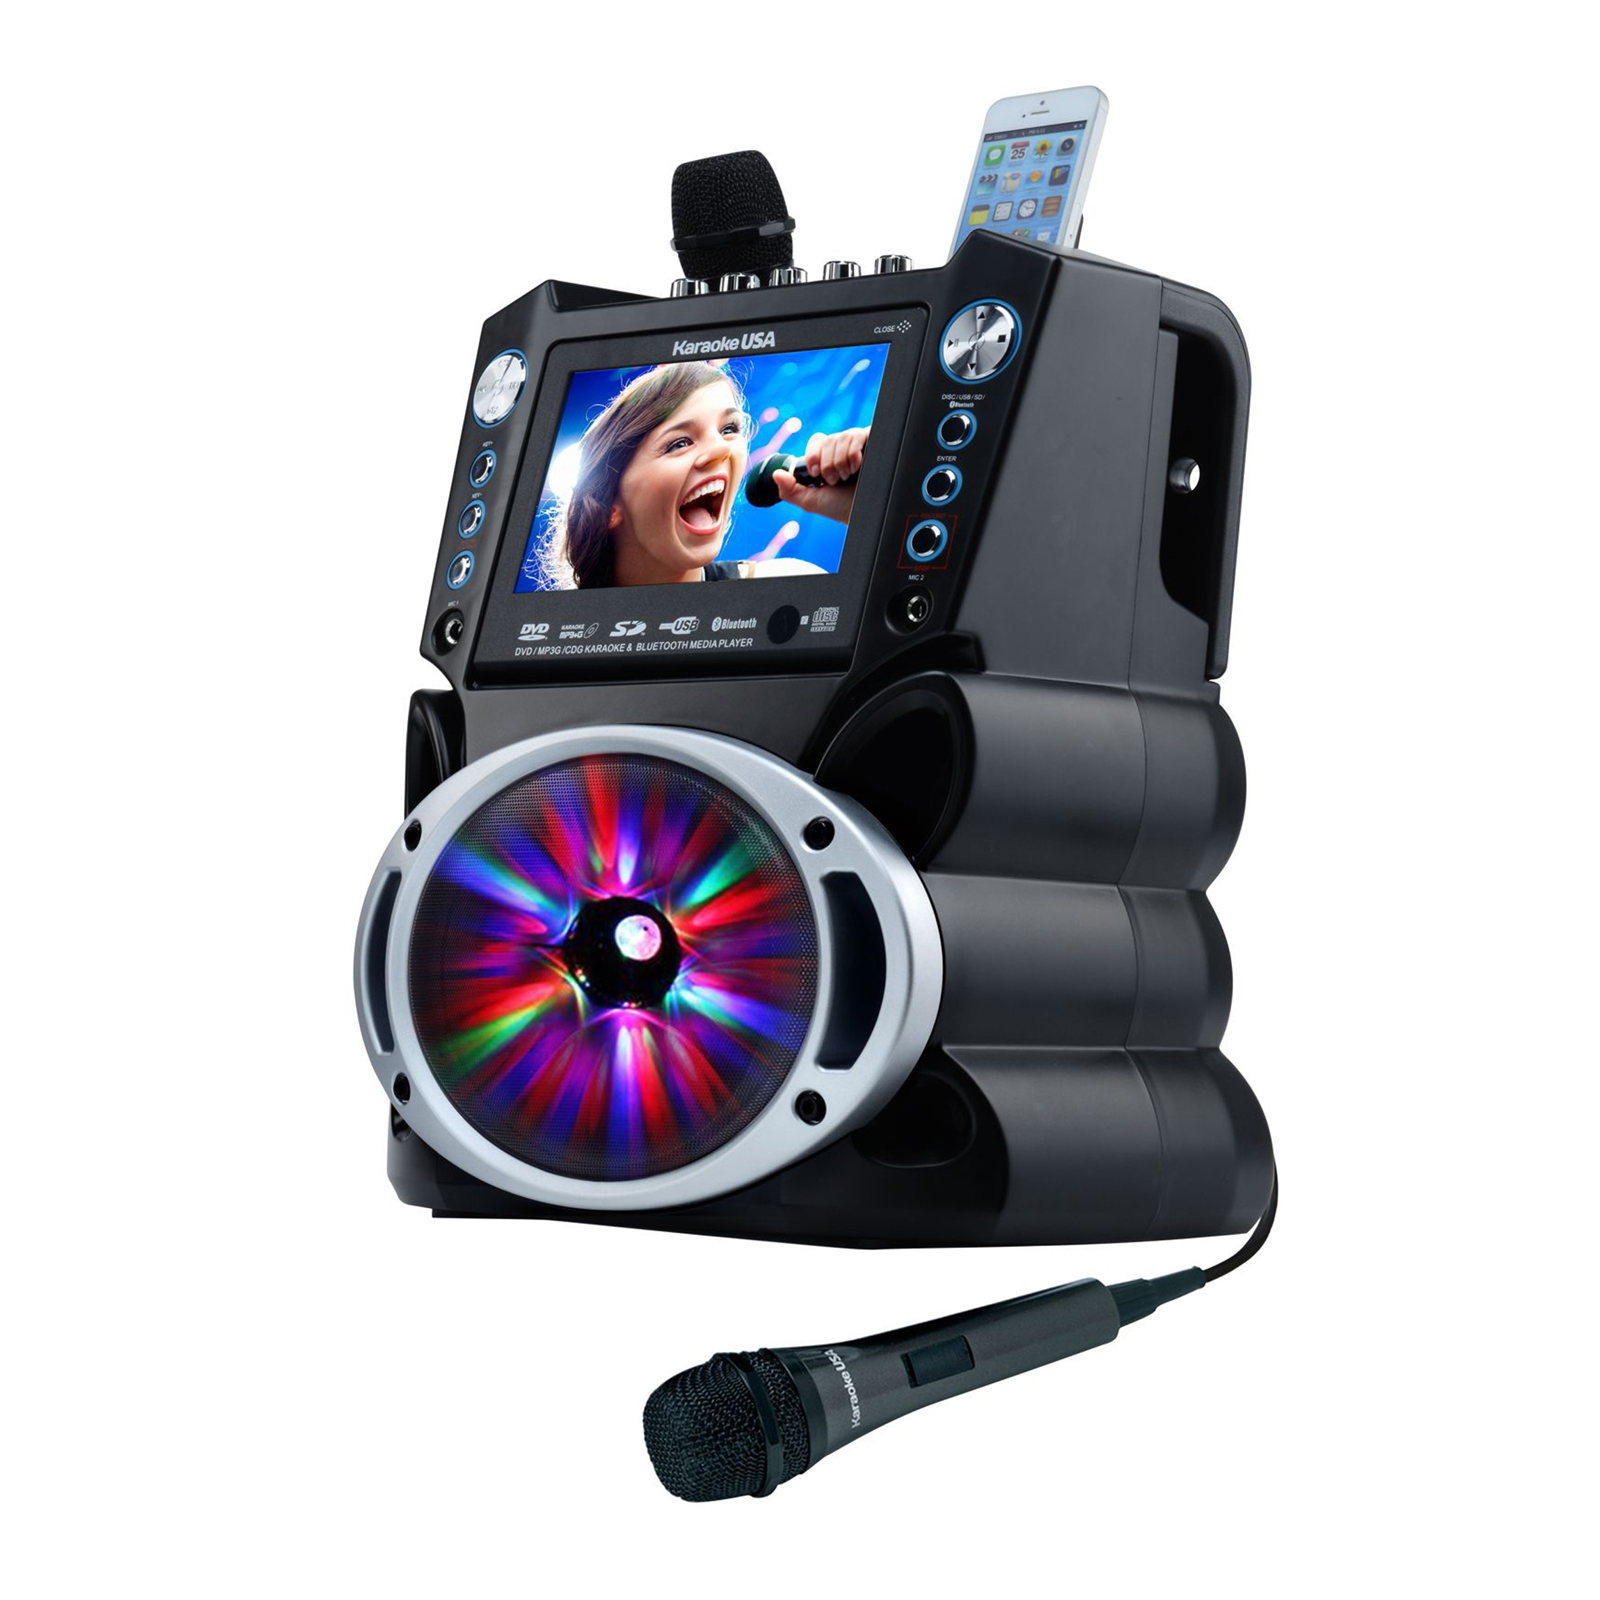 Karaoke USA DVD/CD+G/MP3+G Karaoke System with 7 Inch TFT Color Screen, Record, Bluetooth and LED Sync Lights